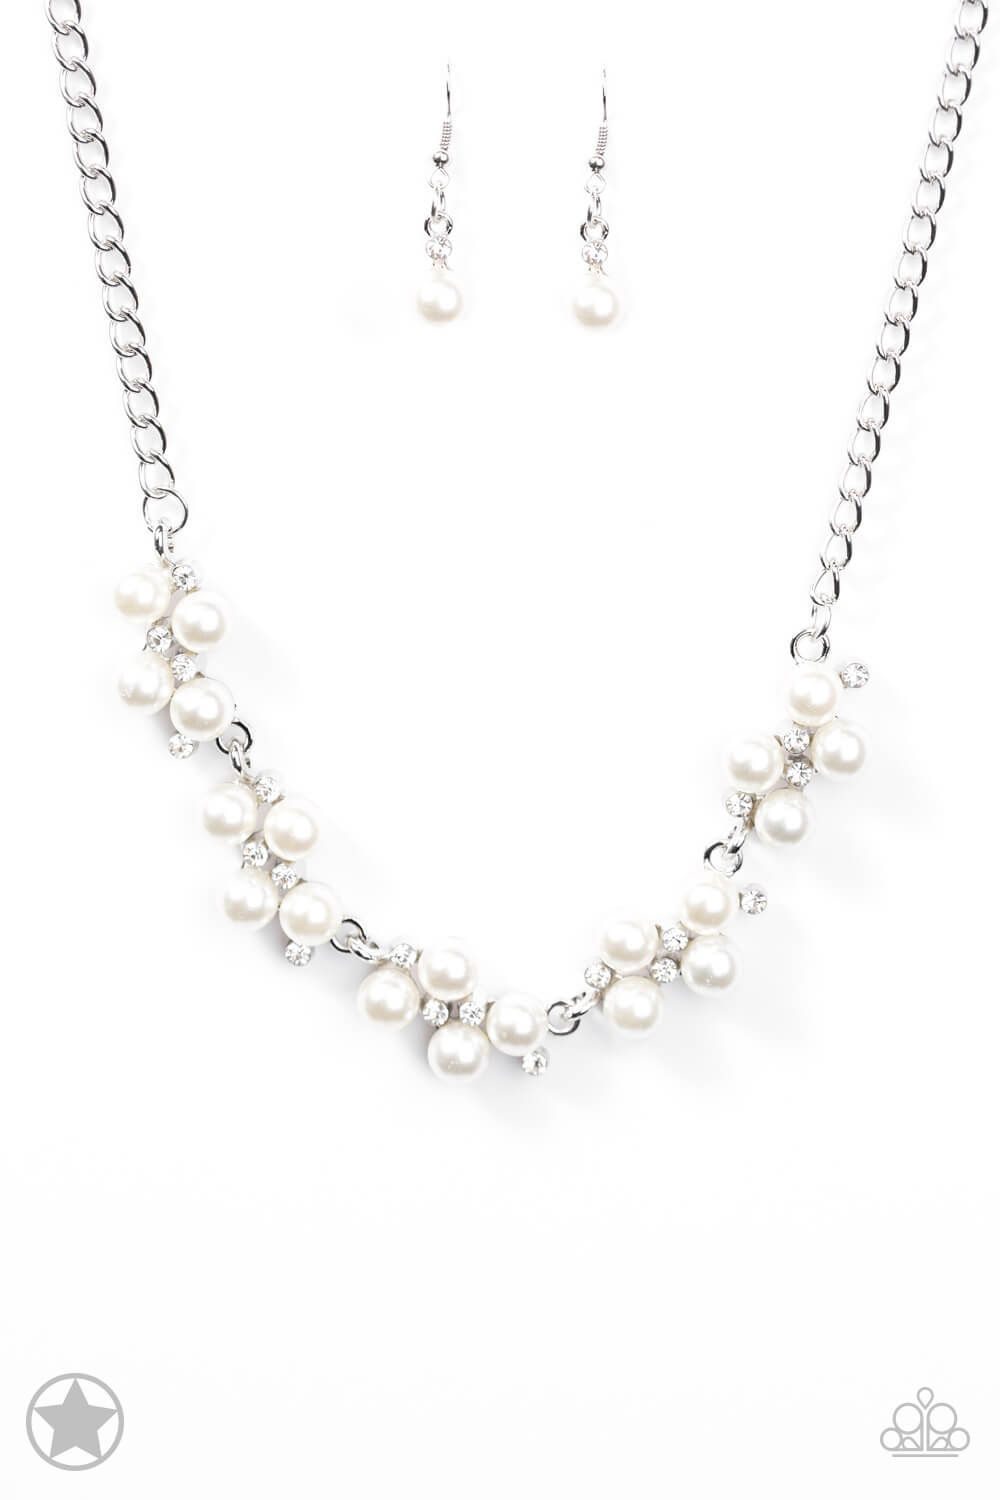 Love Story White Pearl Necklace Set - Princess Glam Shop